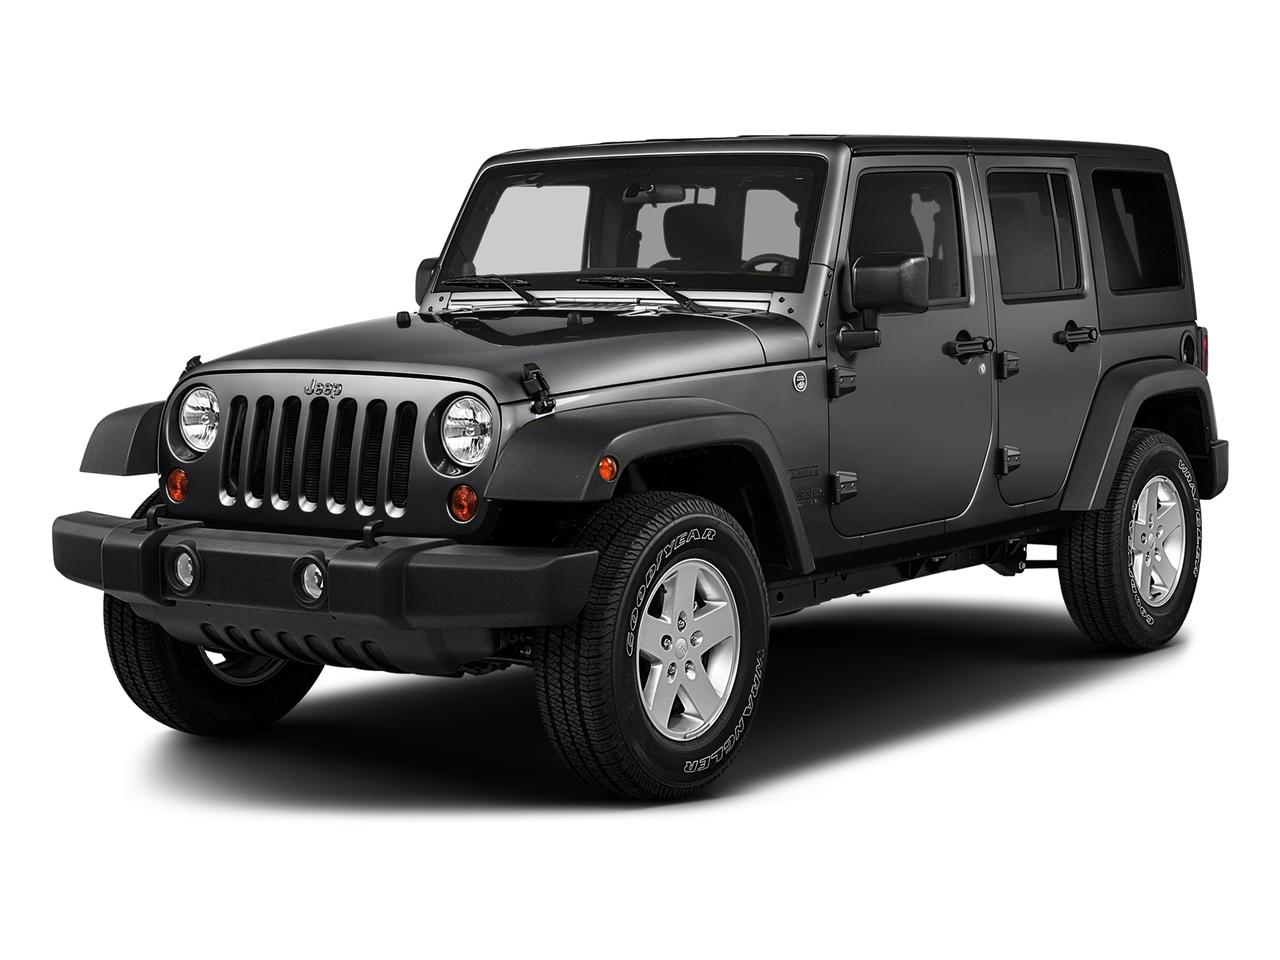 2017 Jeep Wrangler Unlimited Vehicle Photo in Ennis, TX 75119-5114